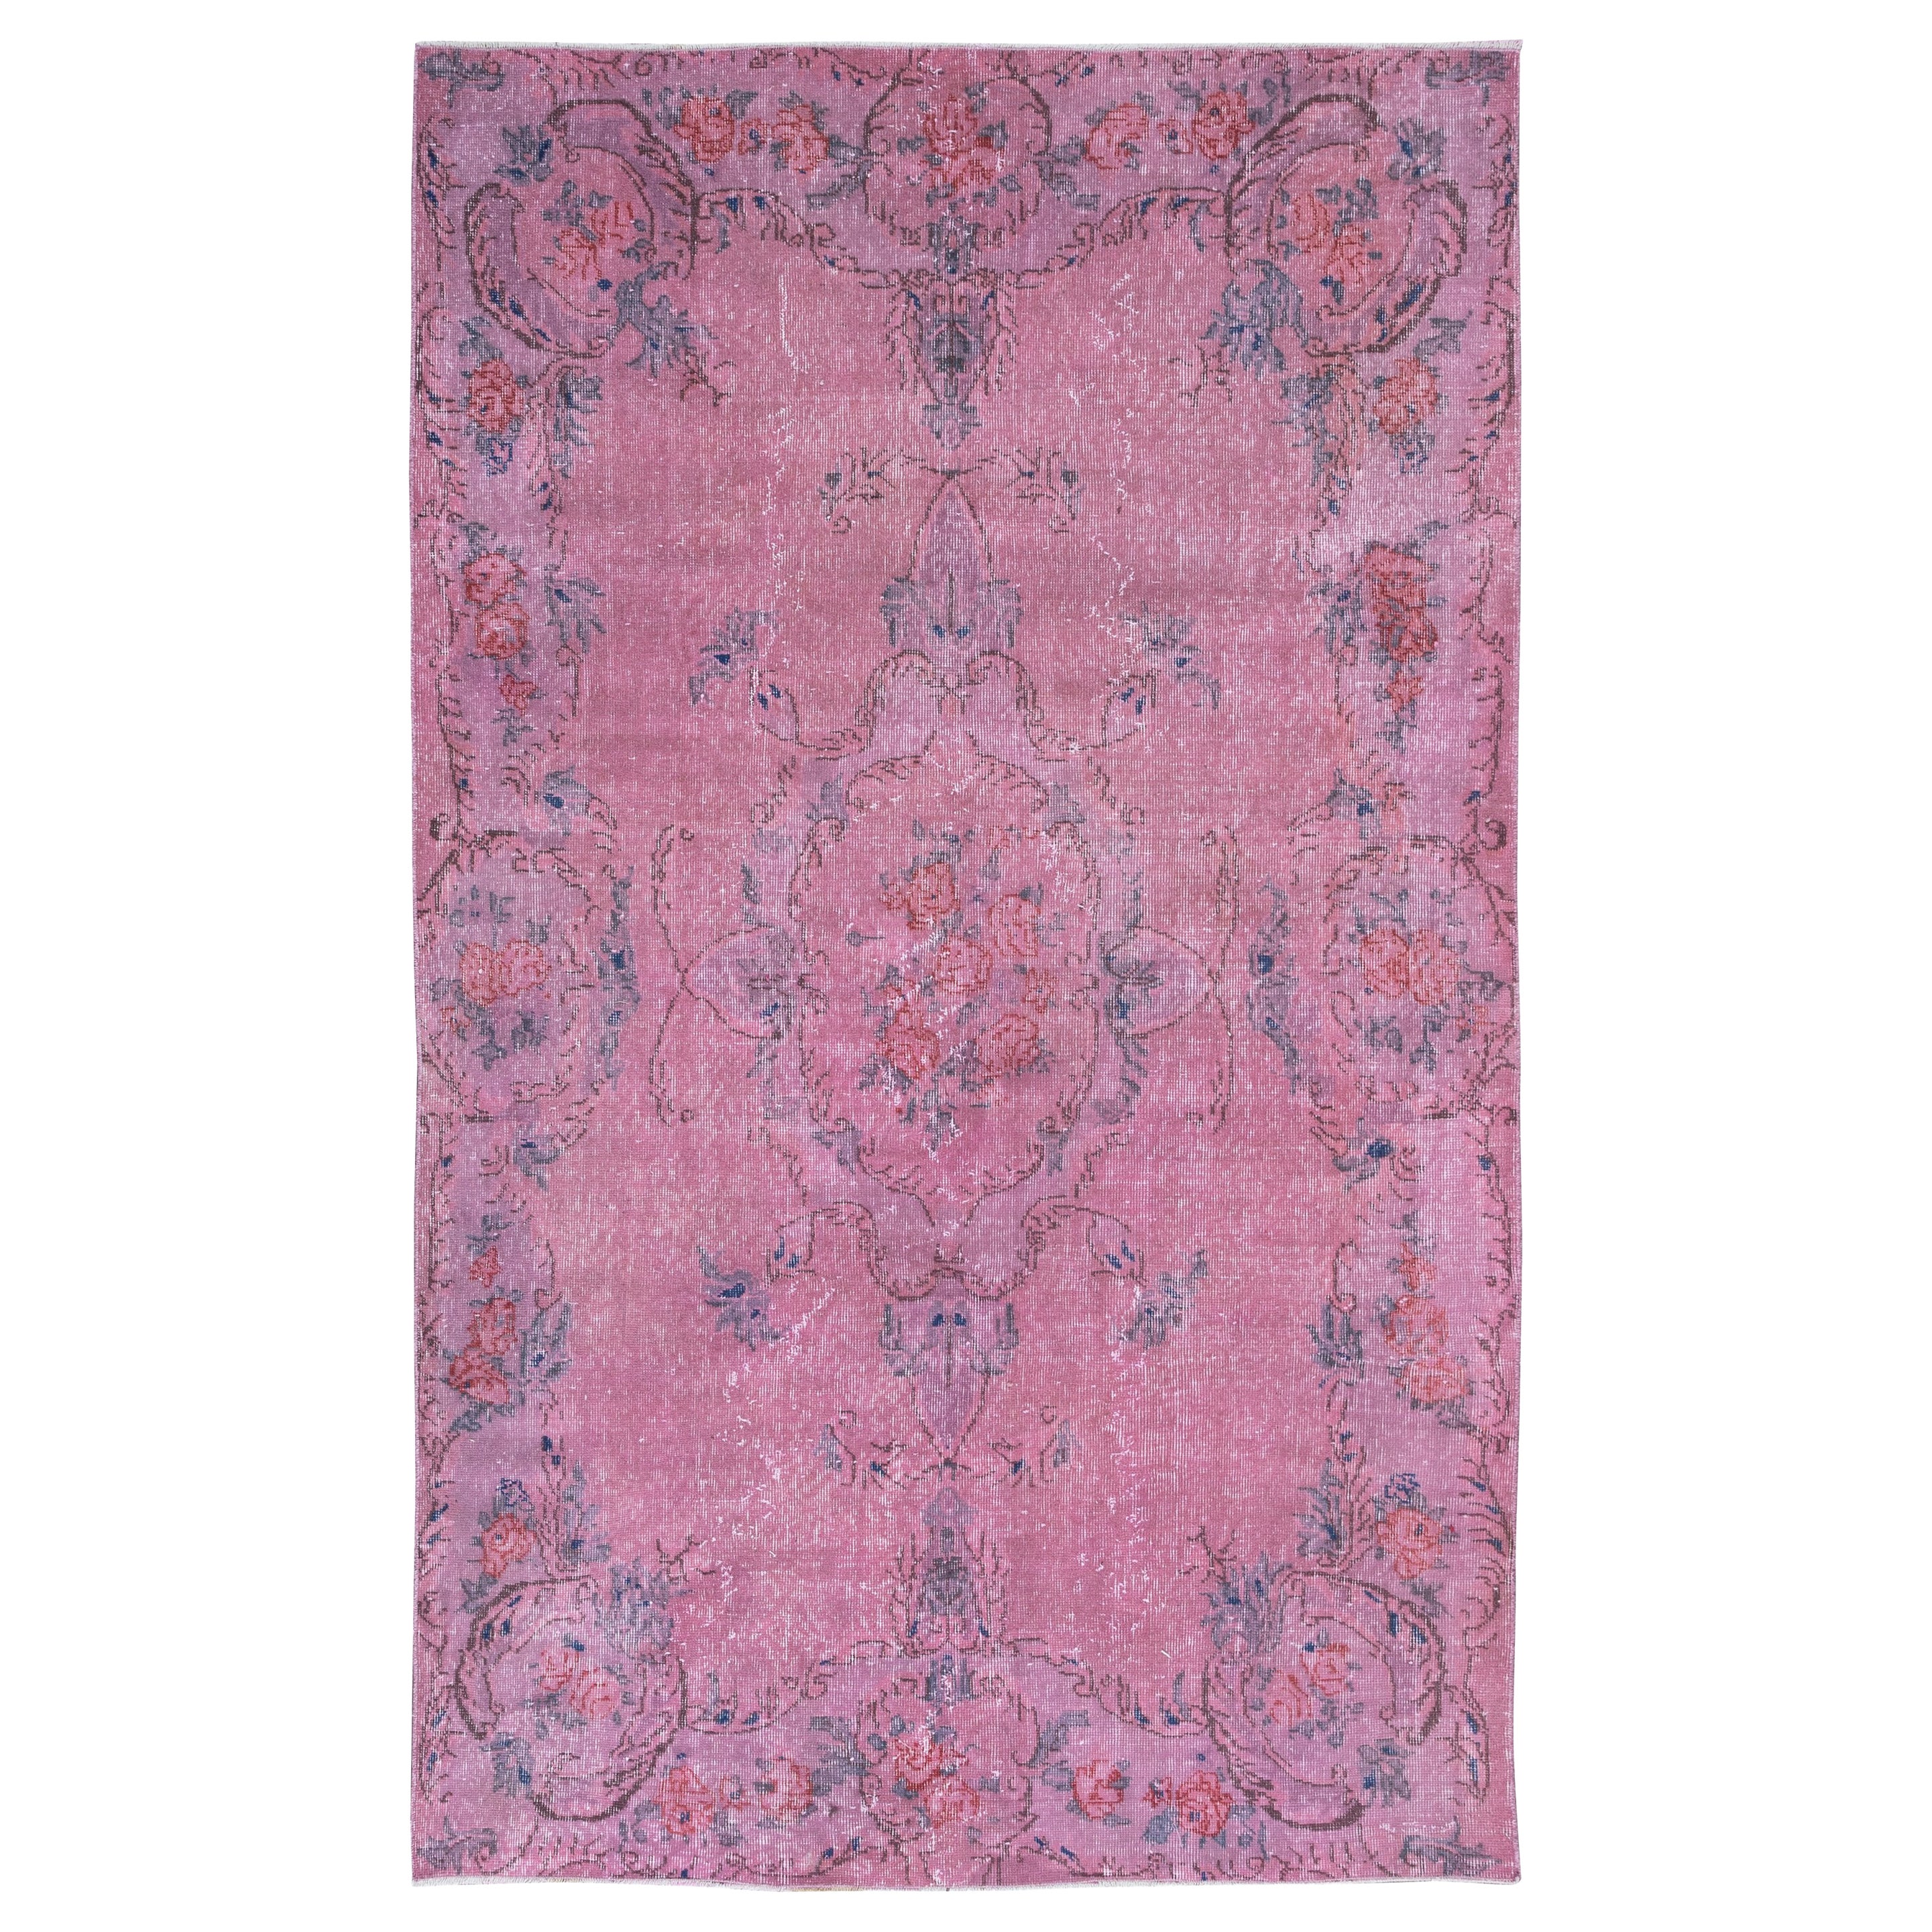 5.4x8.8 Ft Contemporary Handmade Turkish Floral Pattern Area Rug in Soft Pink im Angebot